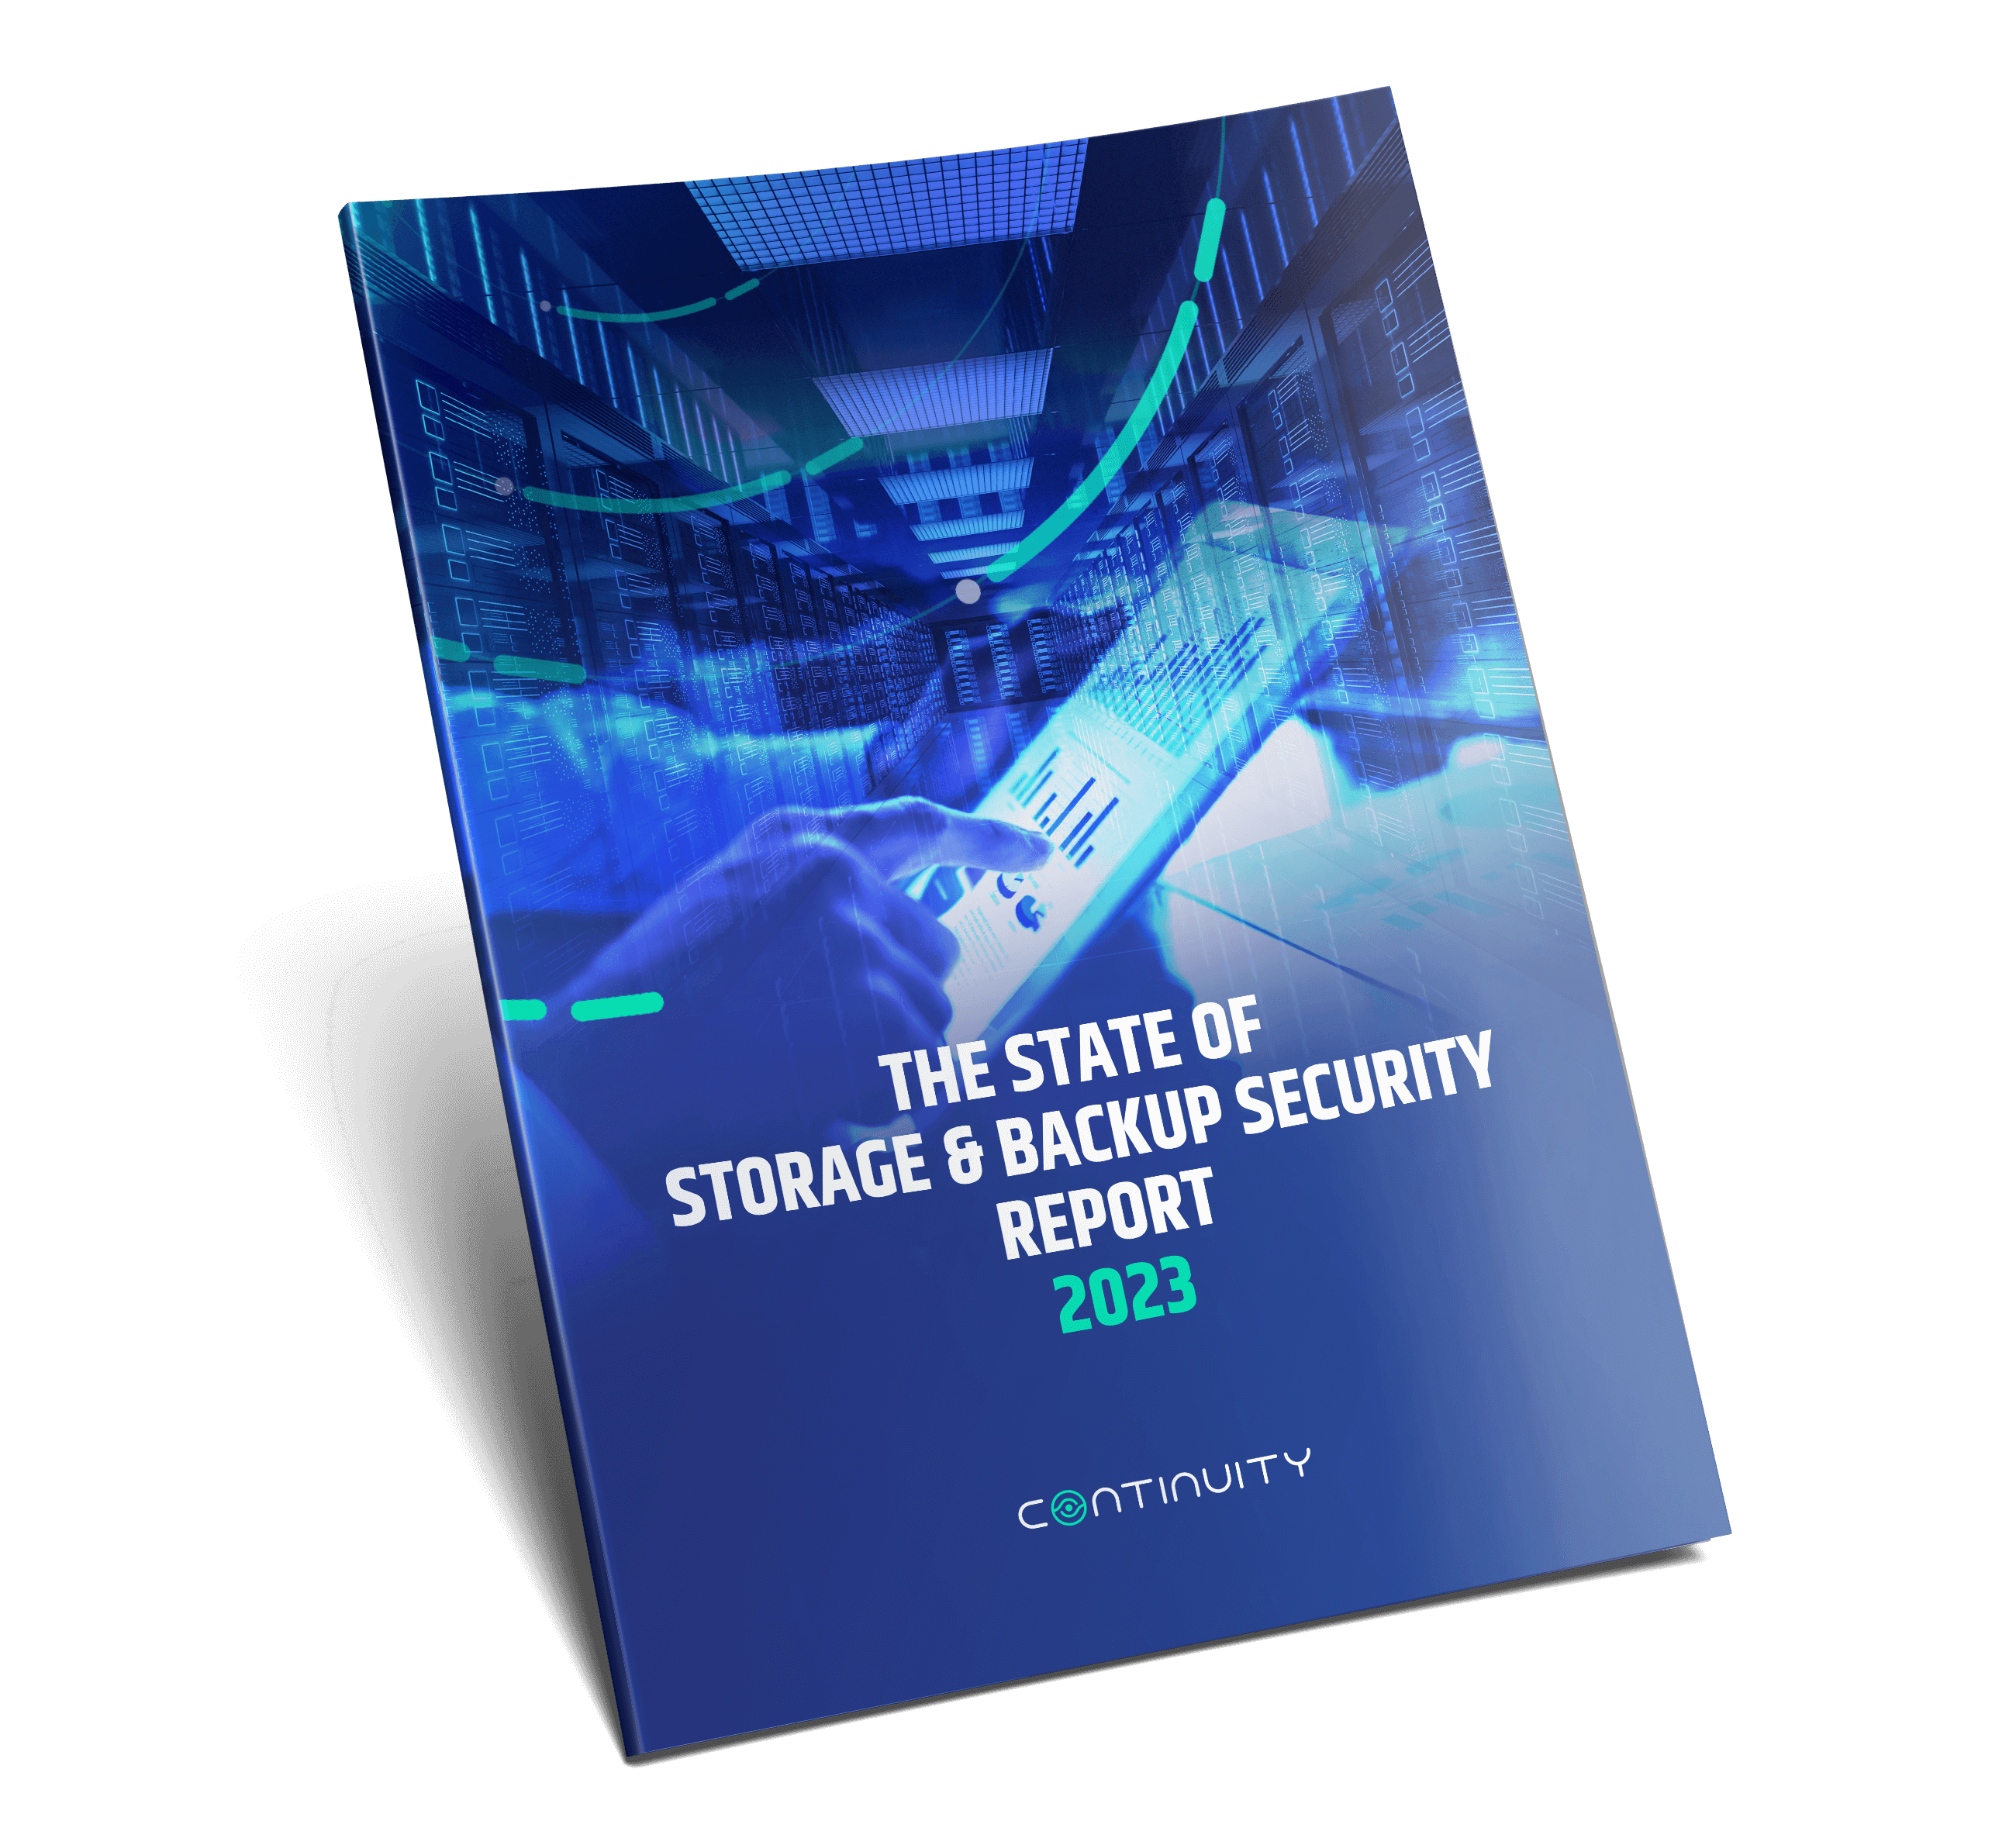 NEW REPORT: The State of Storage & Backup Security Report 2023